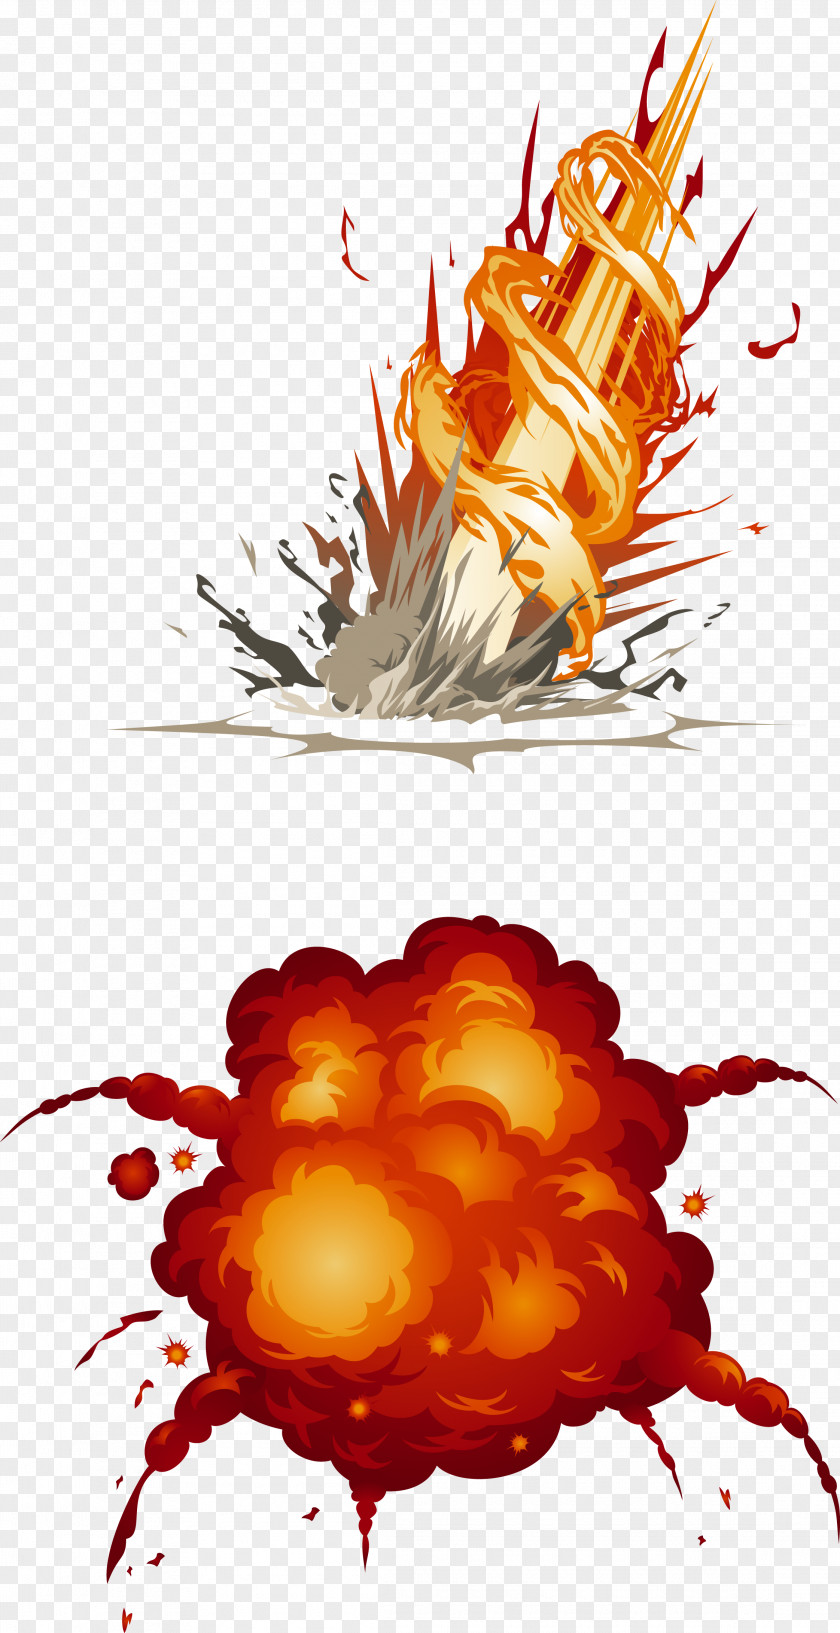 Explosions Explosion Animation Download PNG